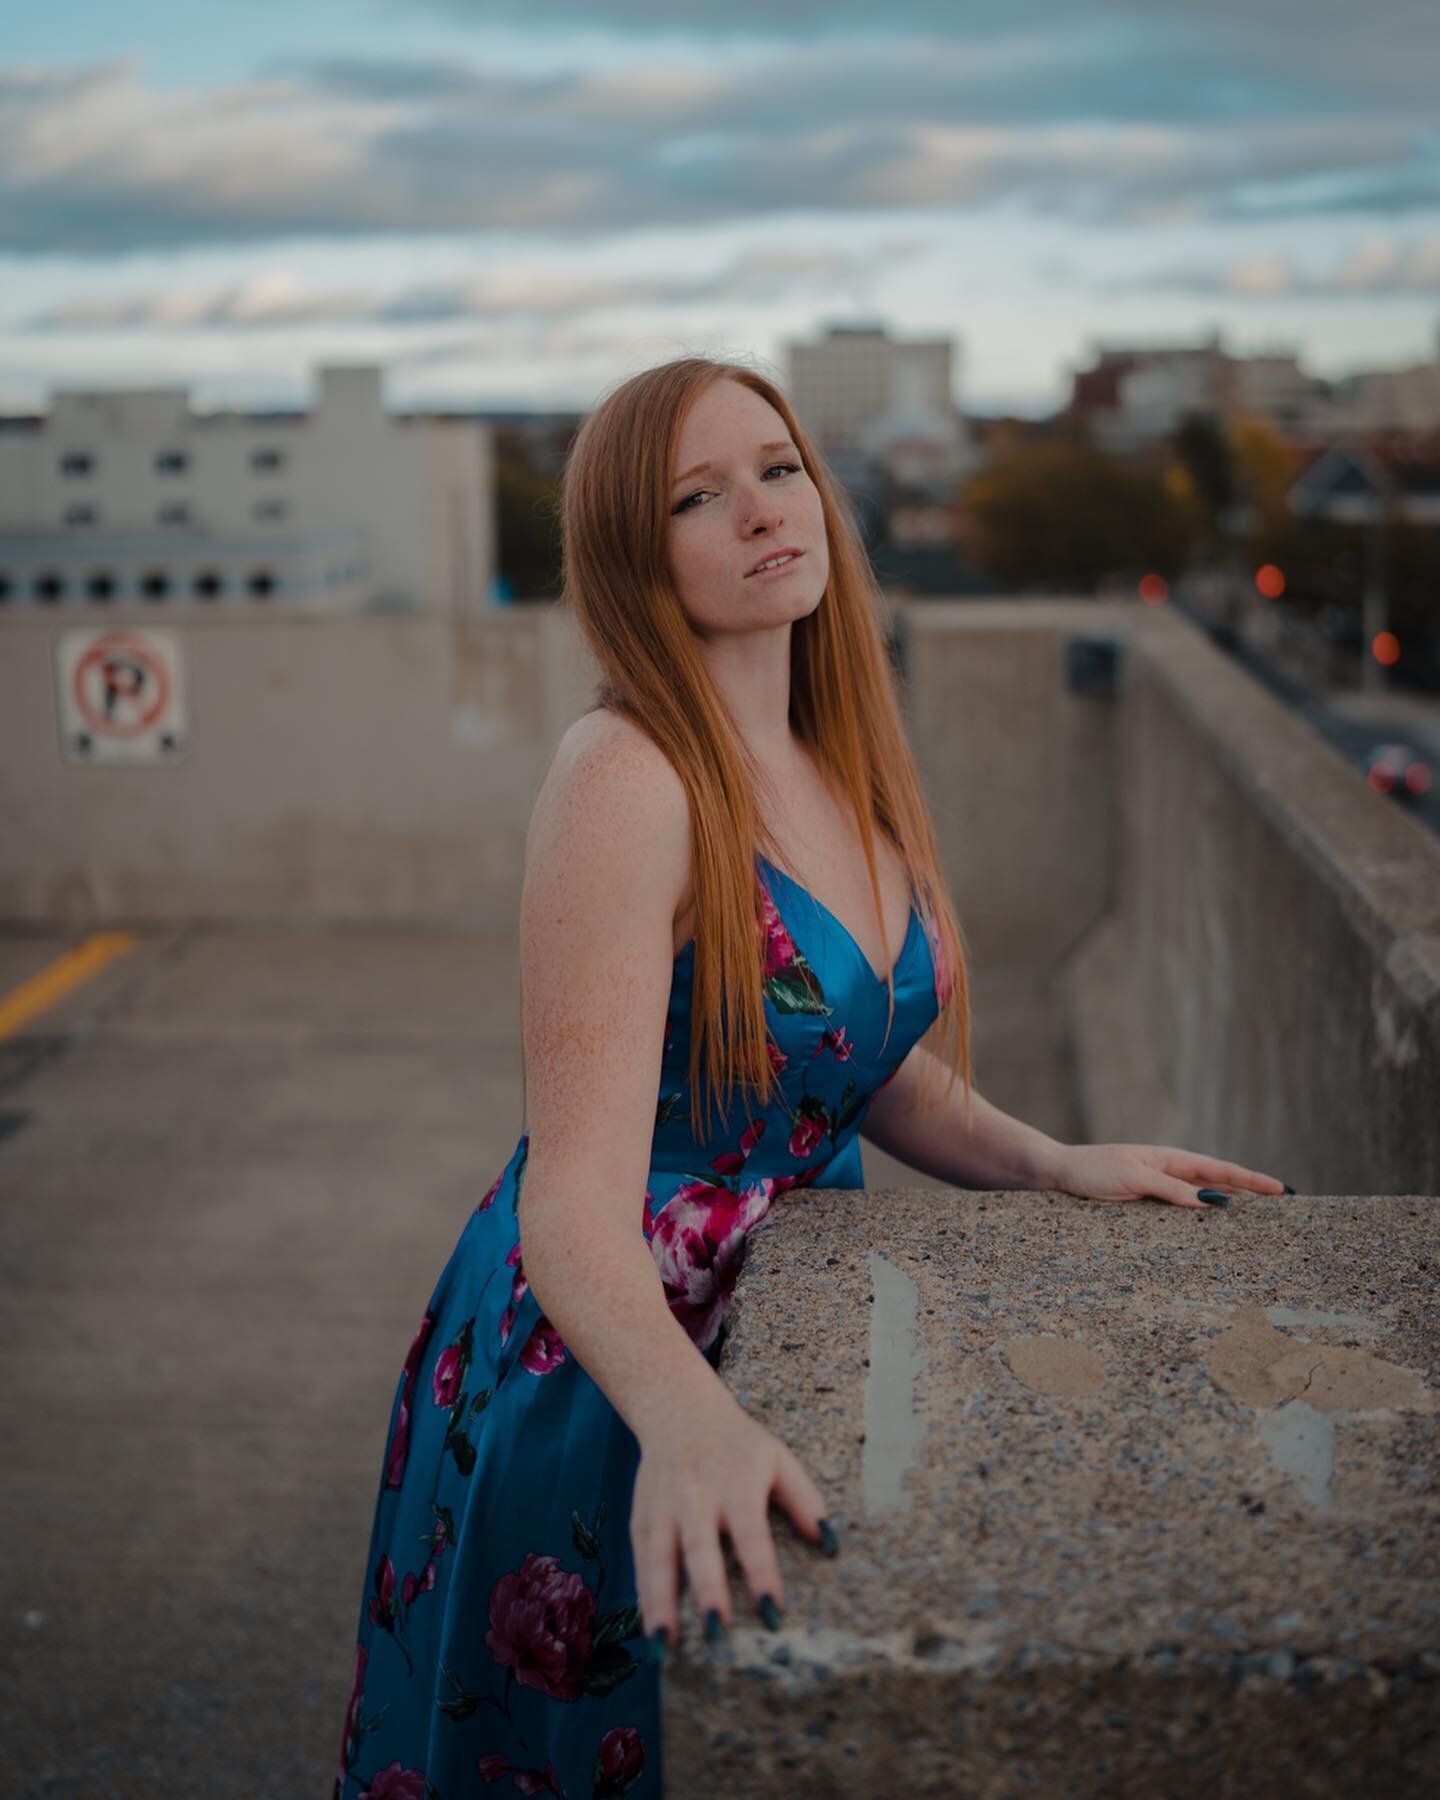 City session with @ethereal_red from last year !